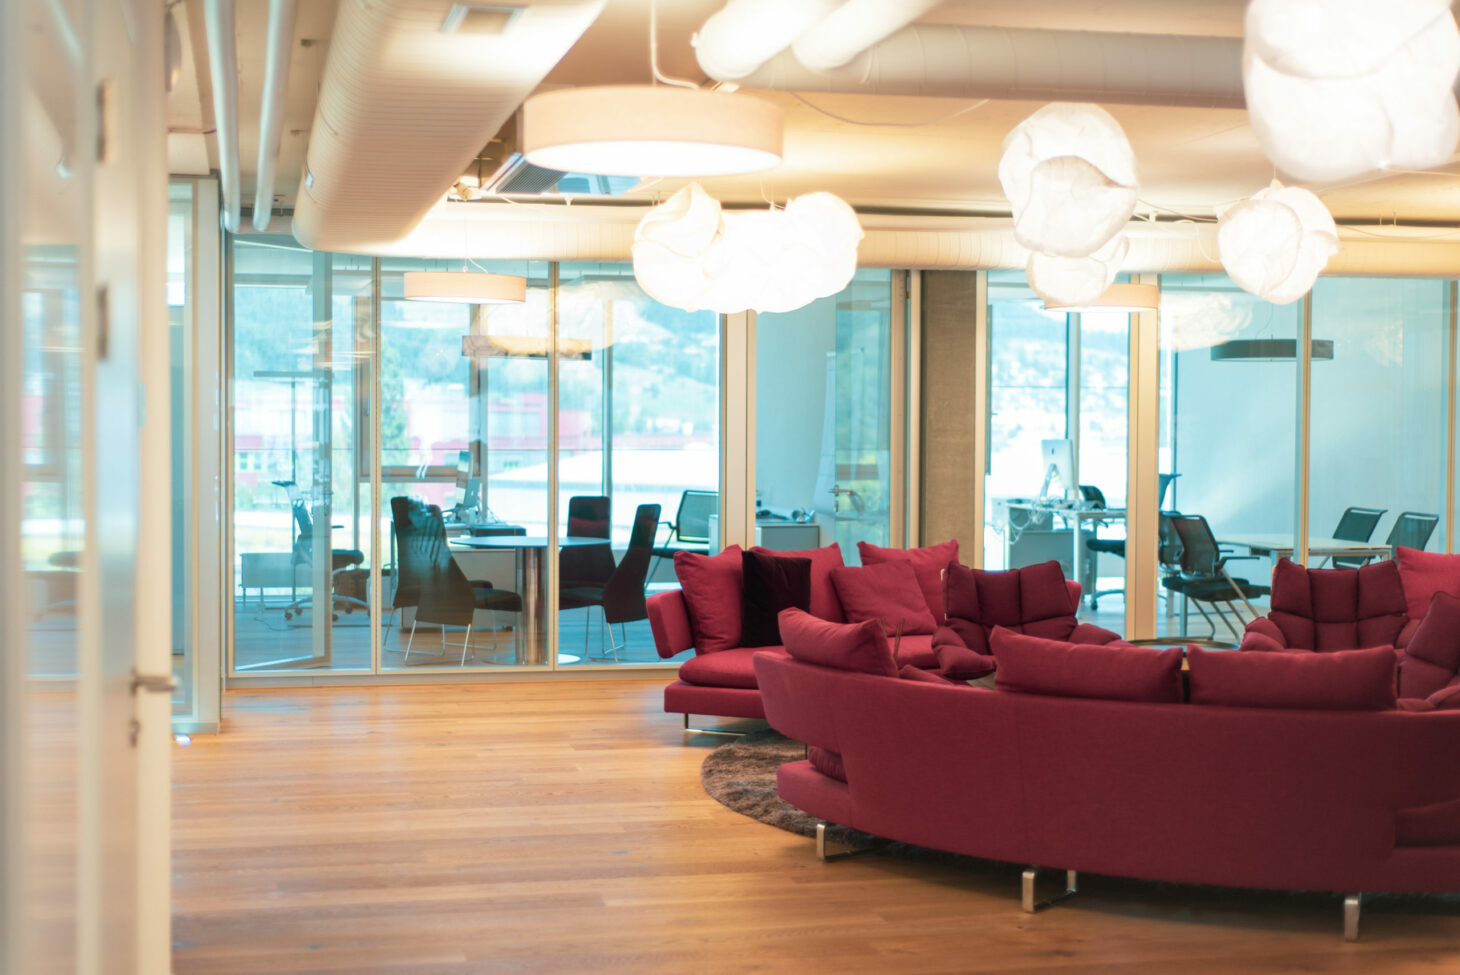 Image of a lounge, valantic Customer Engagement & Commerce (CEC) Switzerland branch in St. Gallen